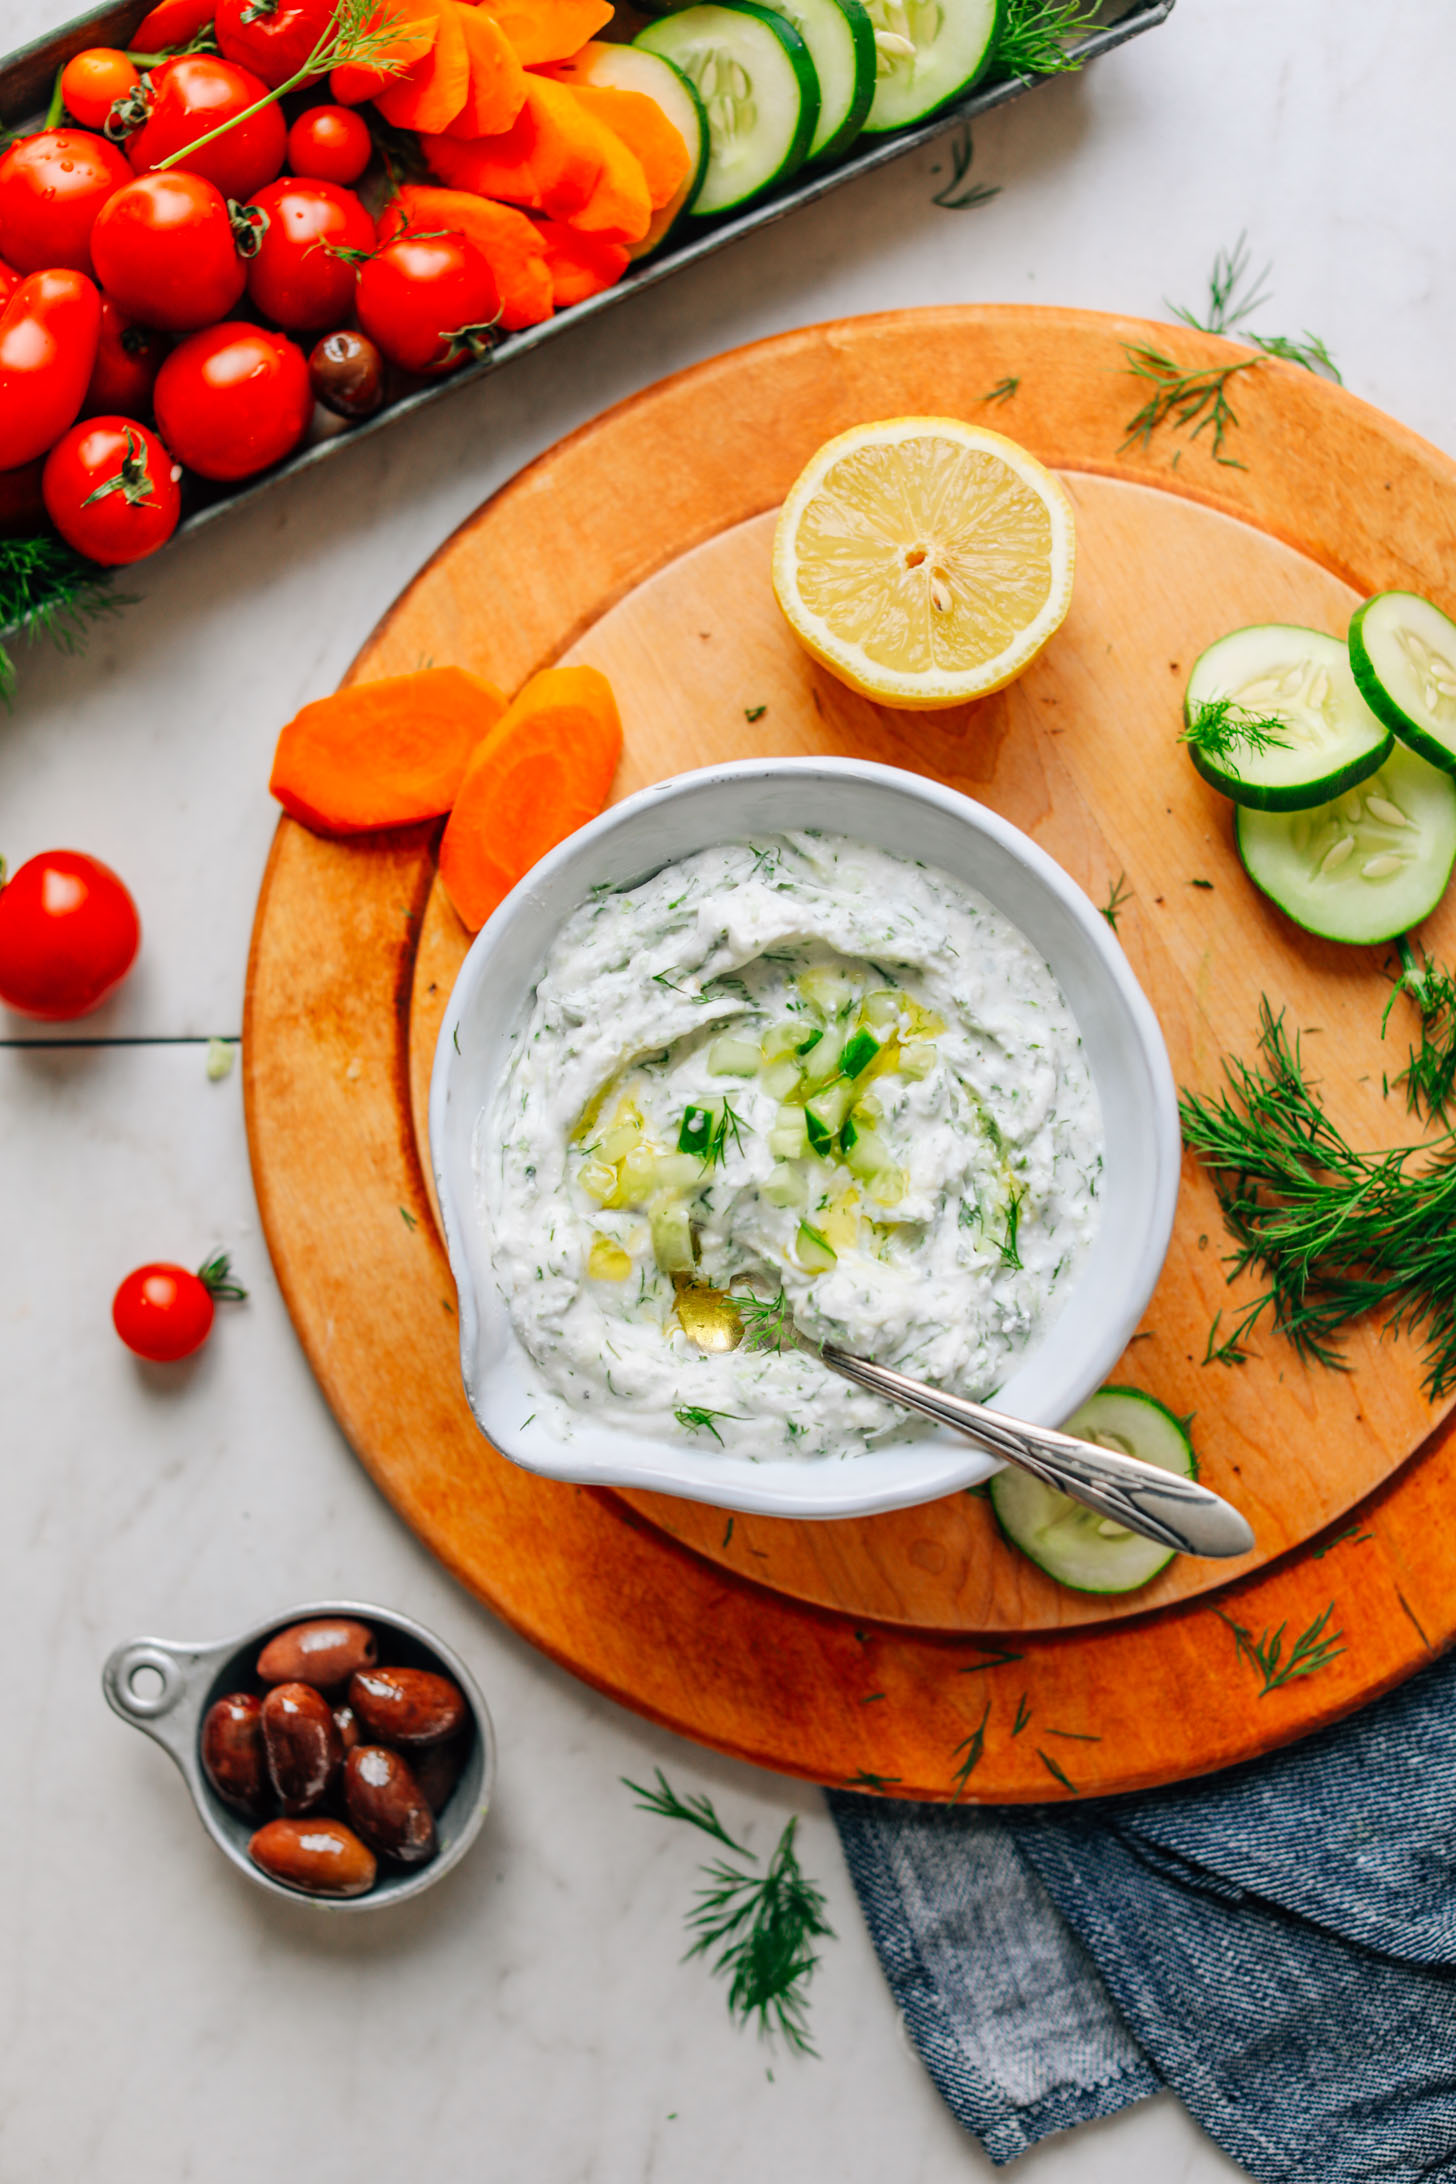 Cutting board with a bowl of Vegan Tzatziki surrounded by key ingredients and veggies for dipping